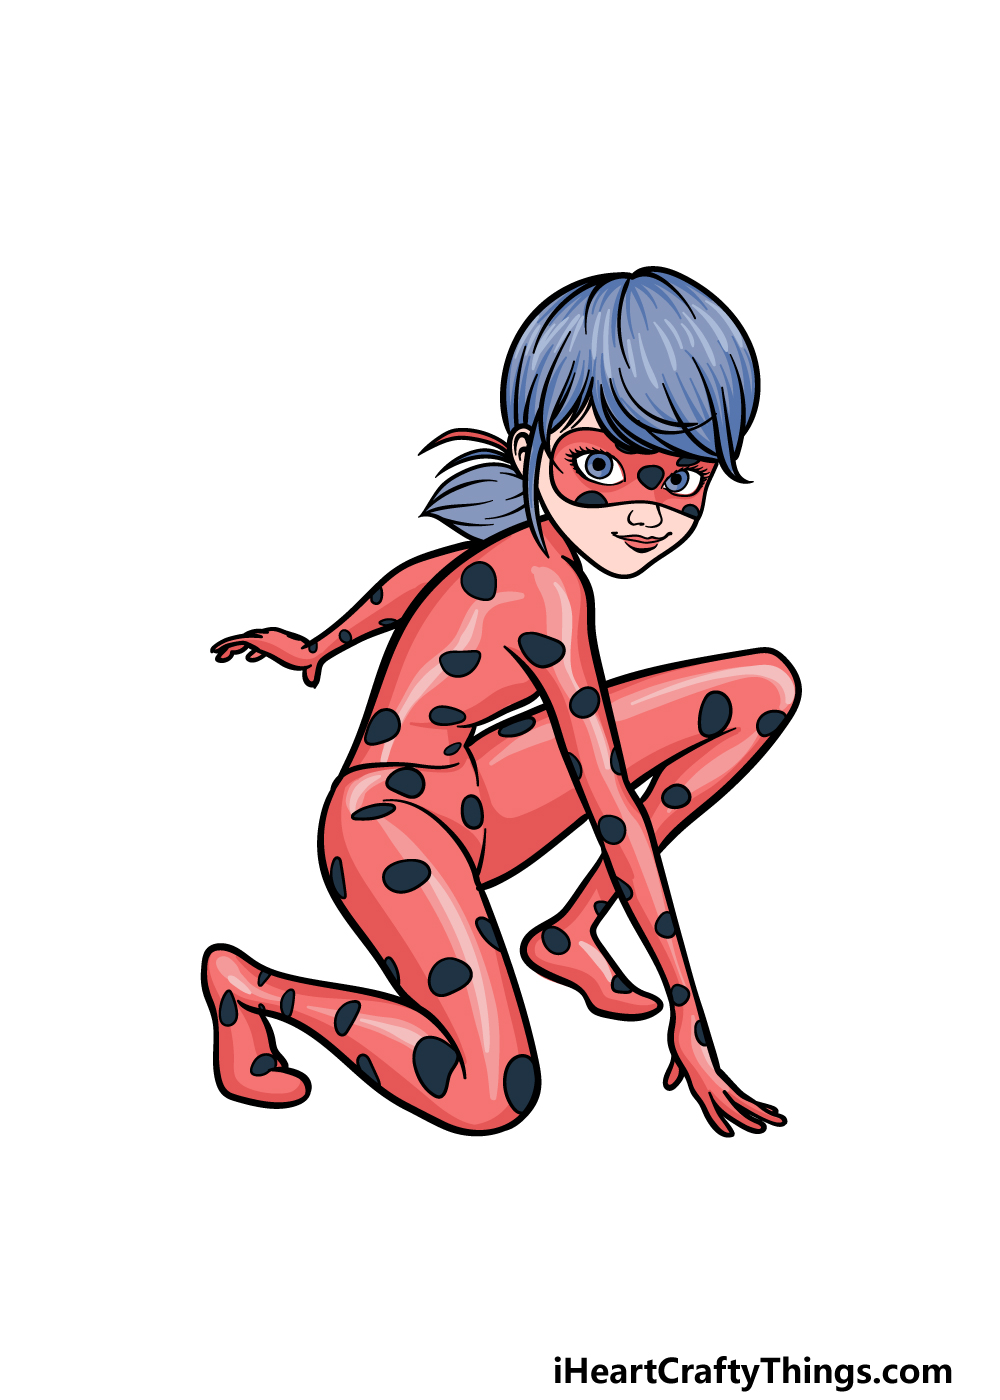 Miraculous Ladybug Drawing - How To Draw Miraculous Ladybug Step By Step